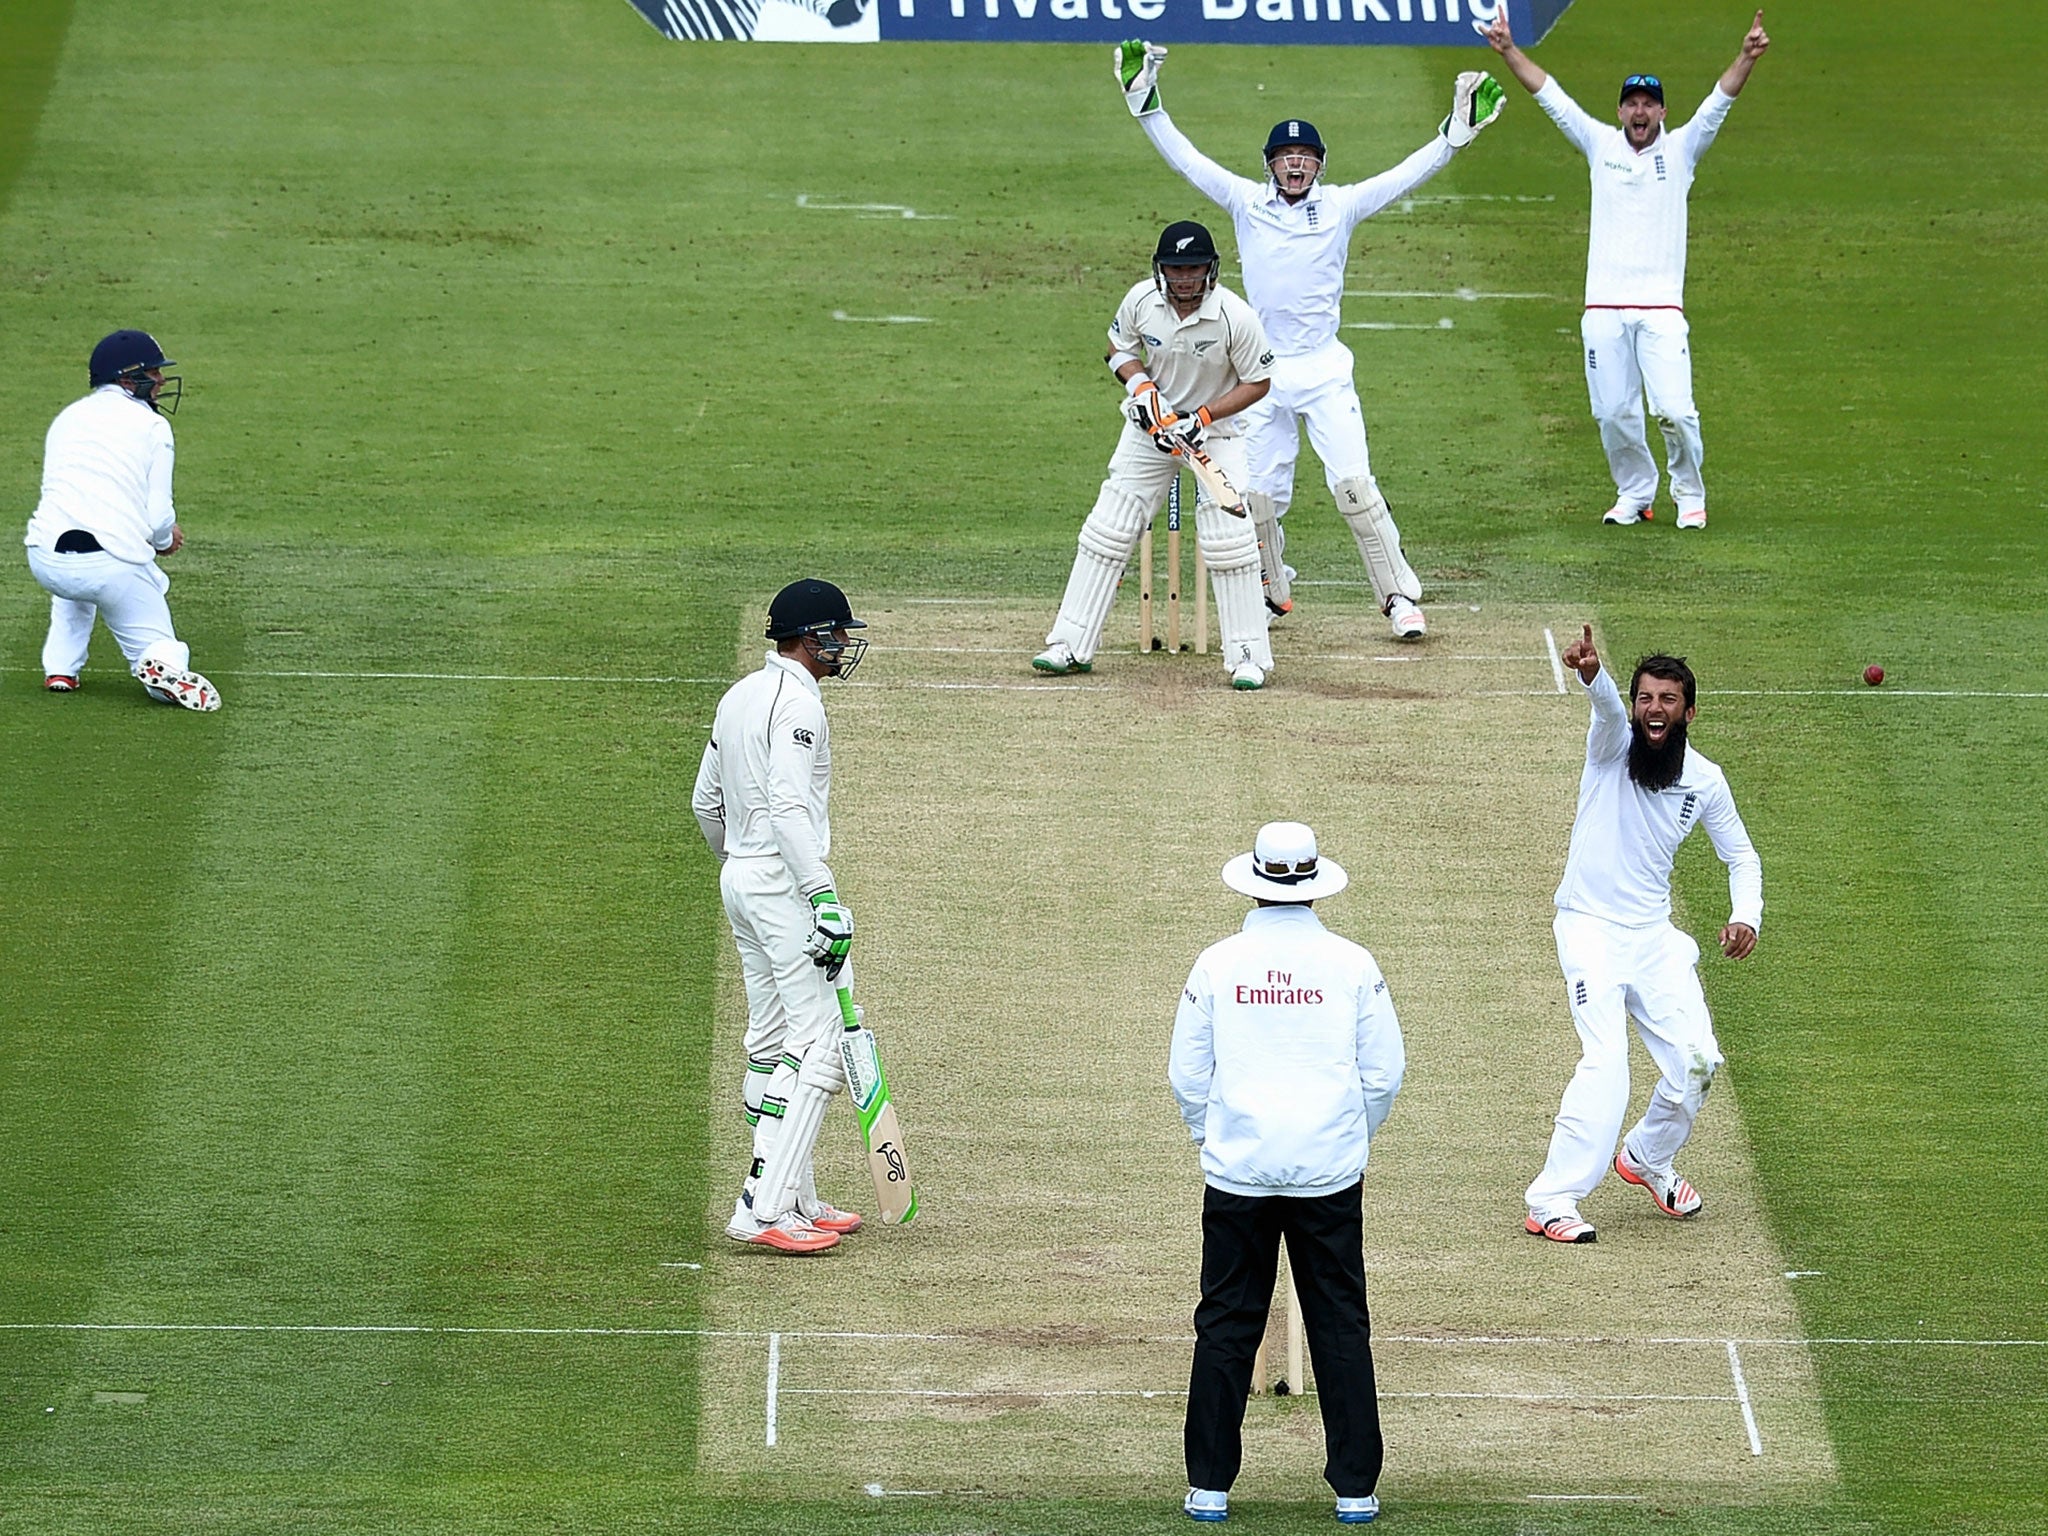 Moeen Ali successfully appeals for the wicket of New Zealand opener Tom Latham